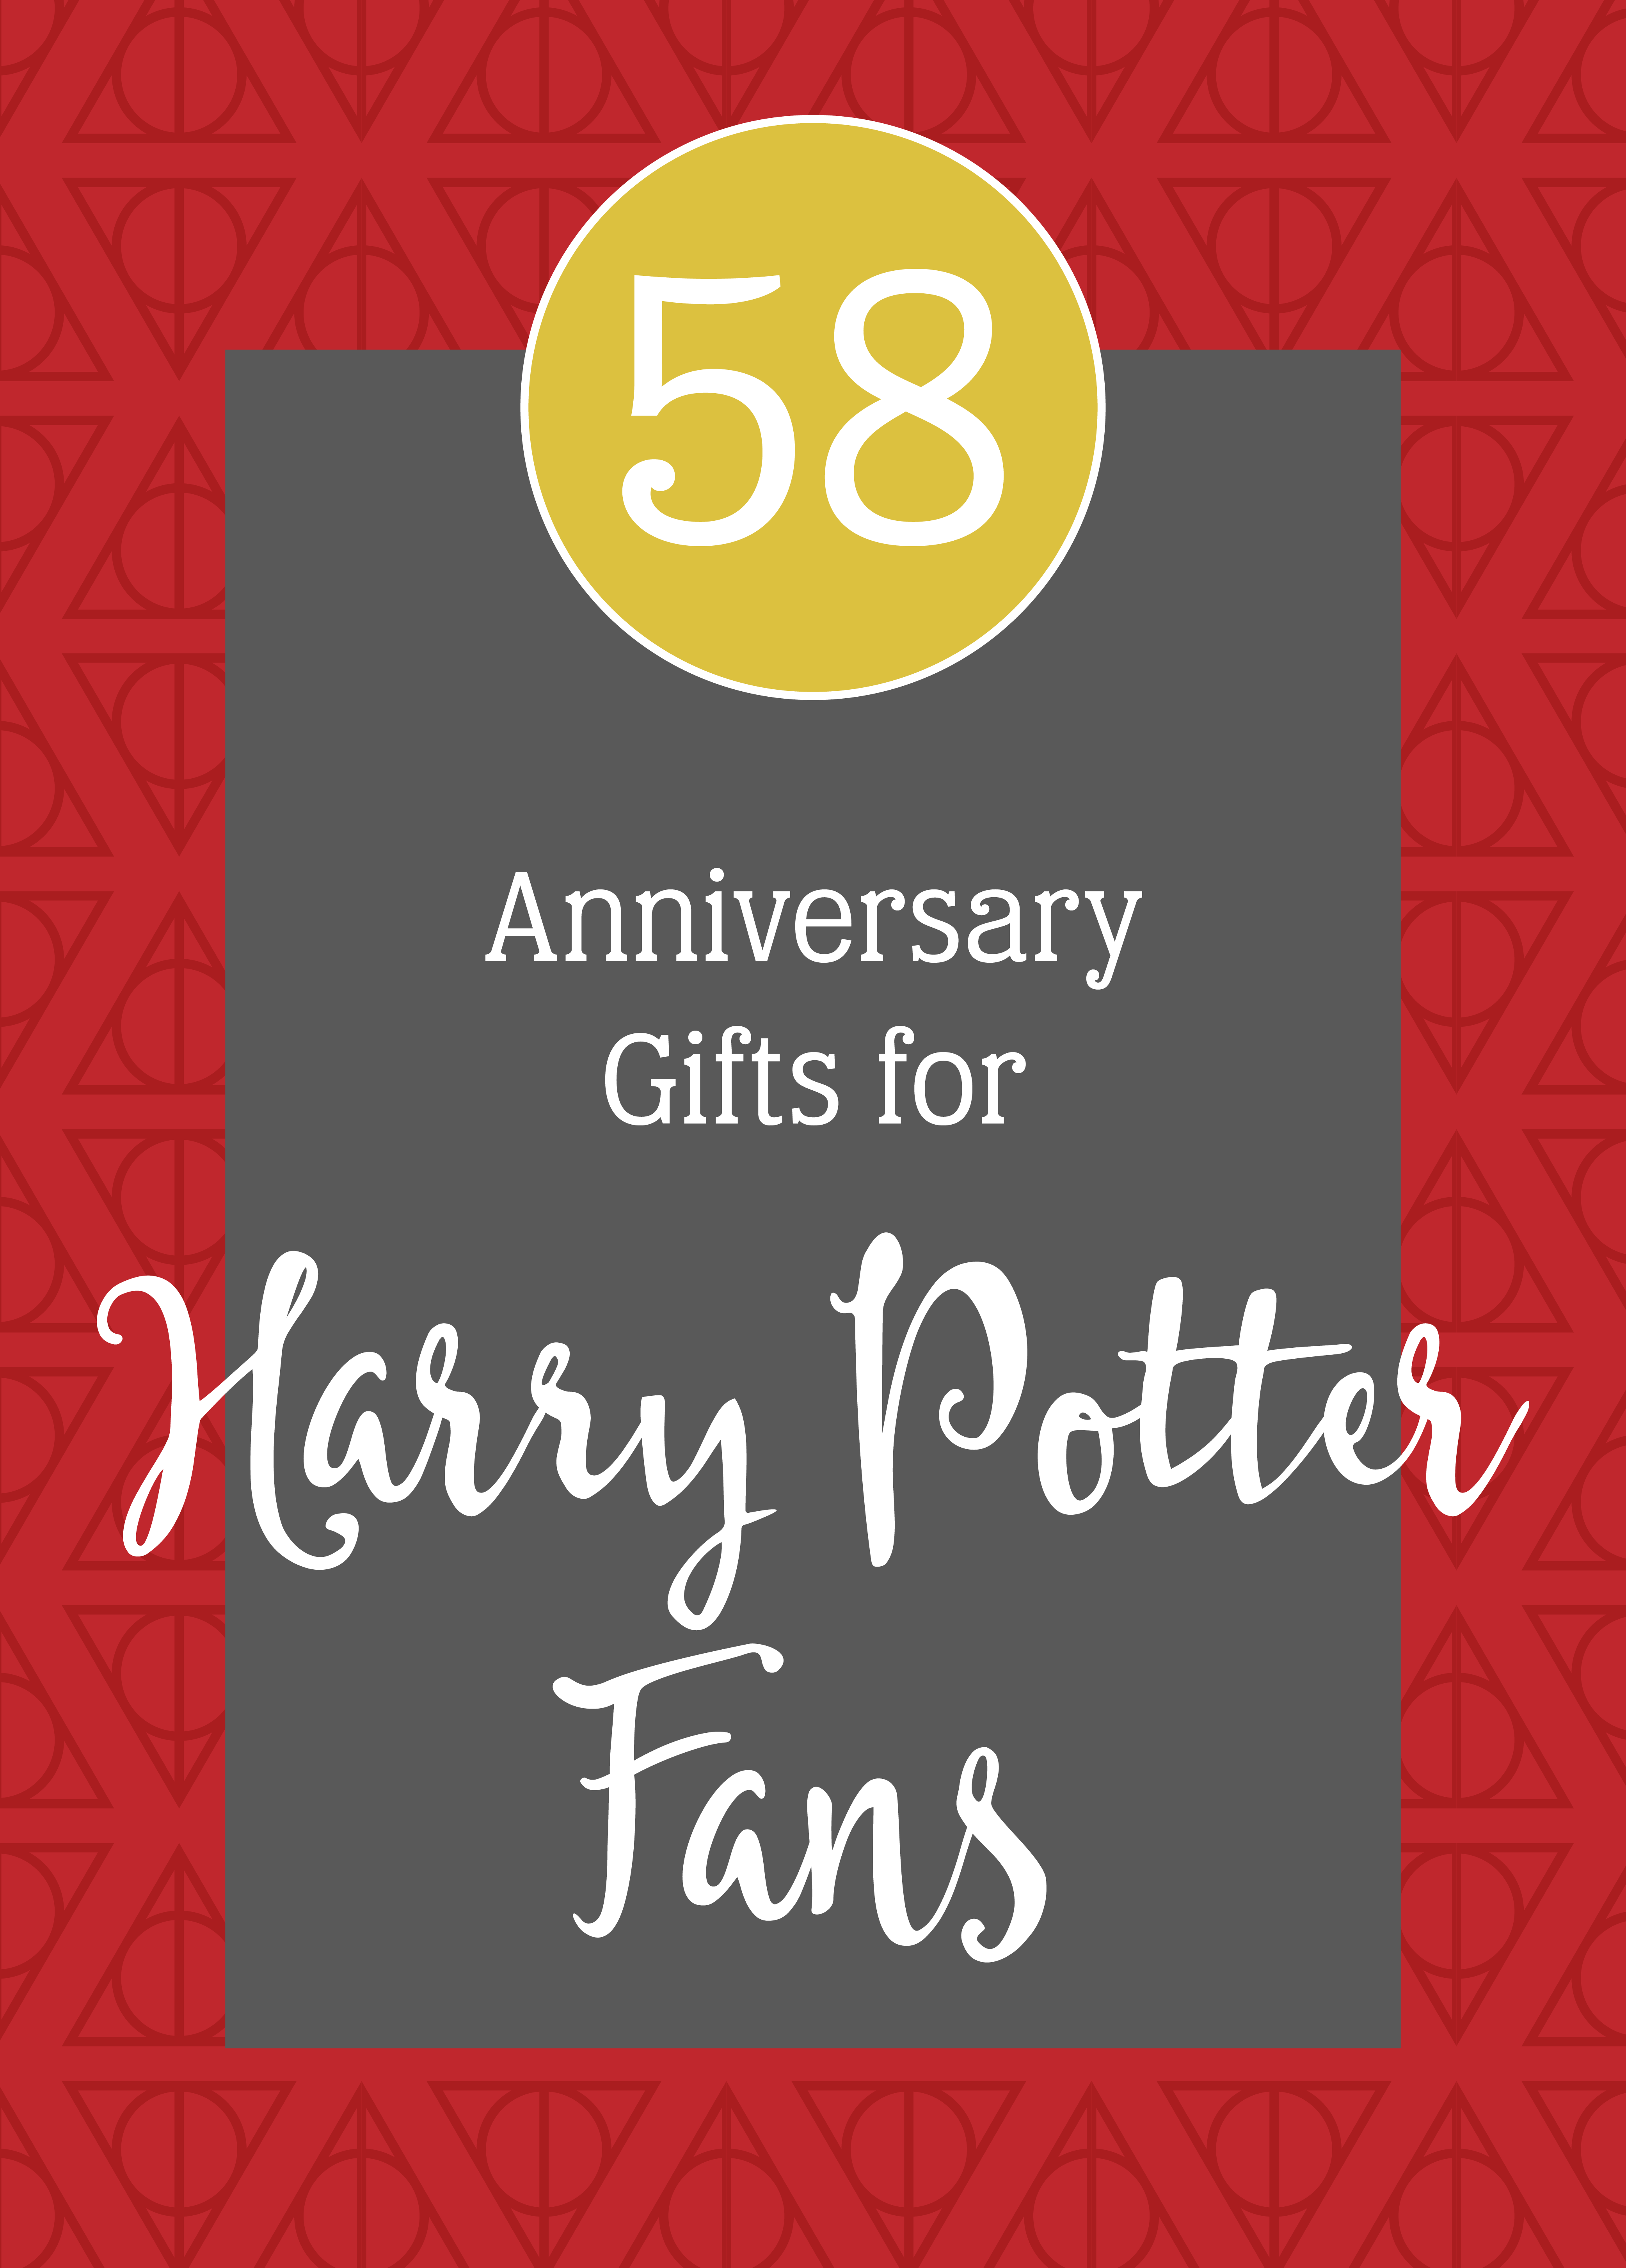 Red background with a Deathly Hallows pattern and white text that reads "58 Anniversary Gifts for Harry Potter Fans"